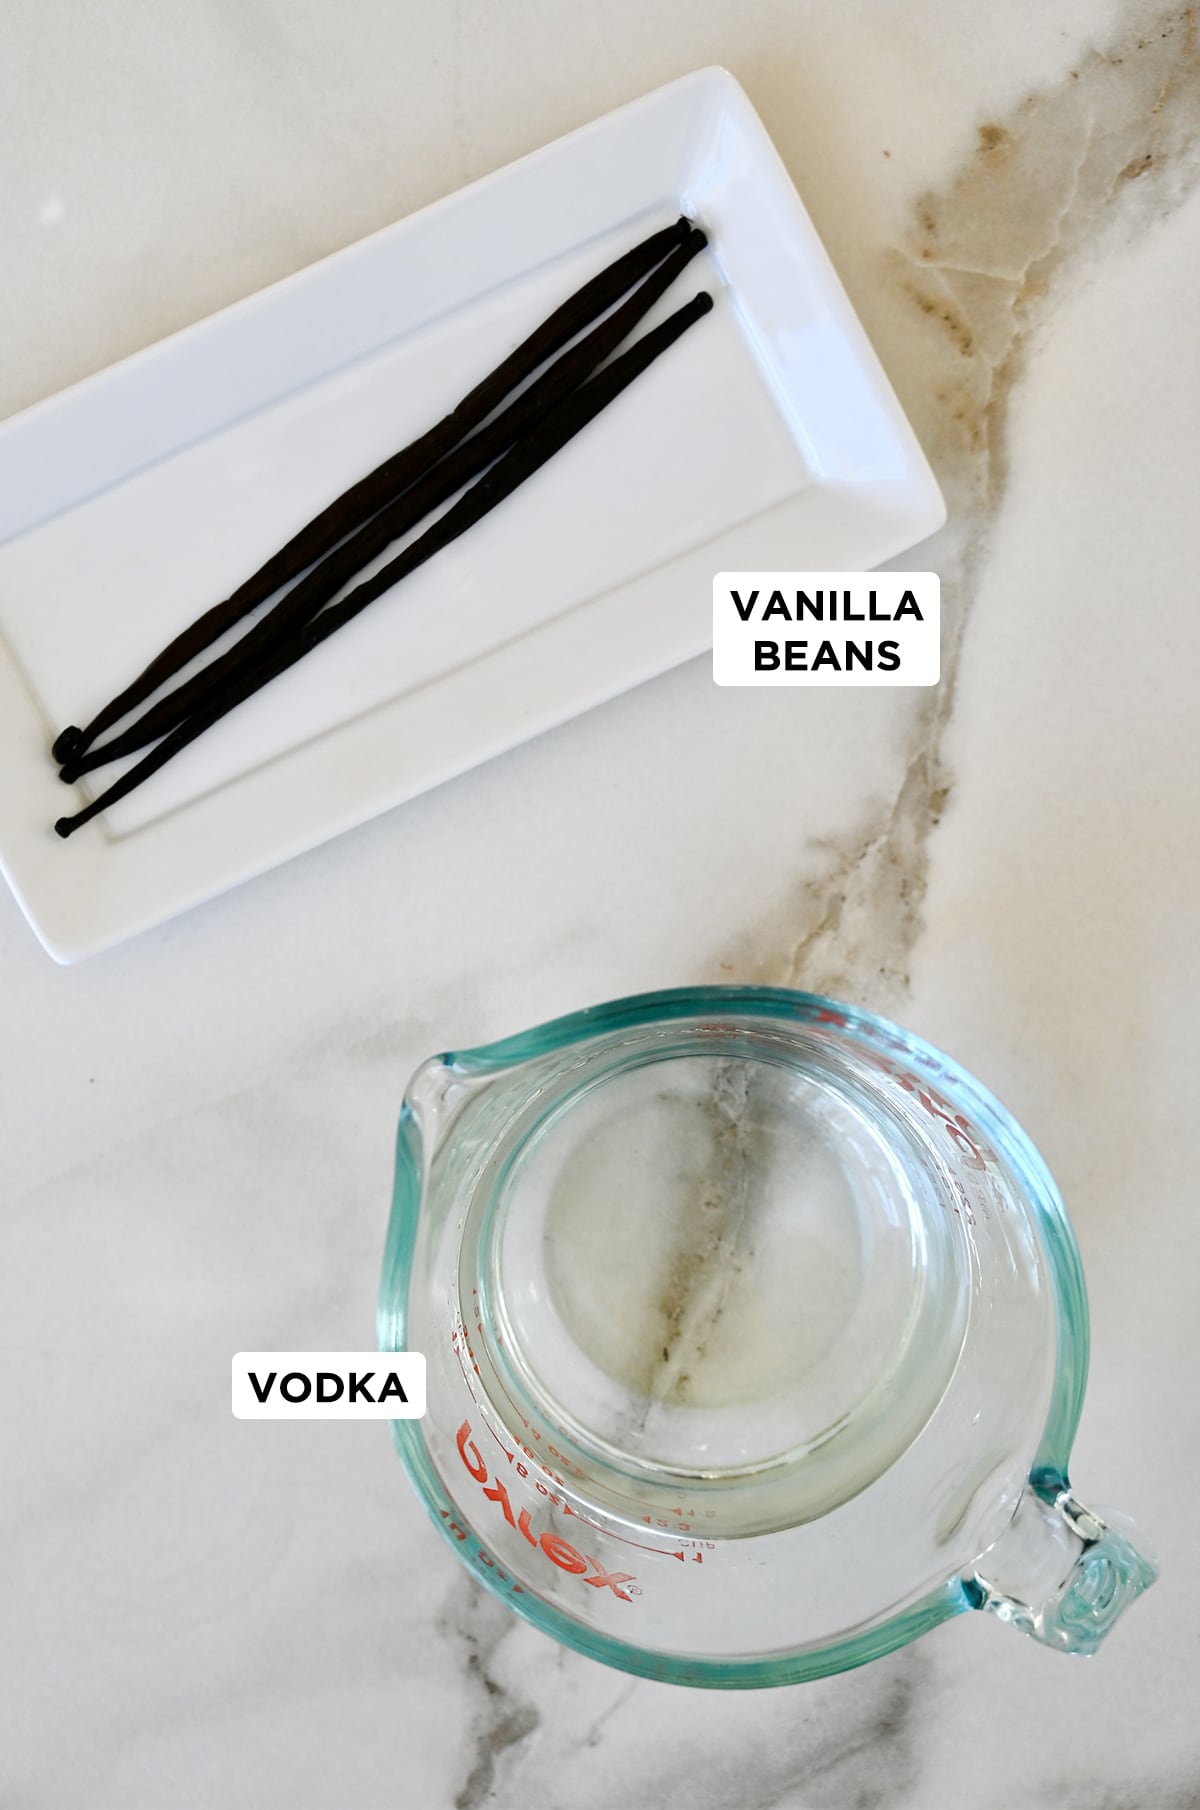 Vanilla beans on a white plate next to a liquid measuring cup containing vodka.